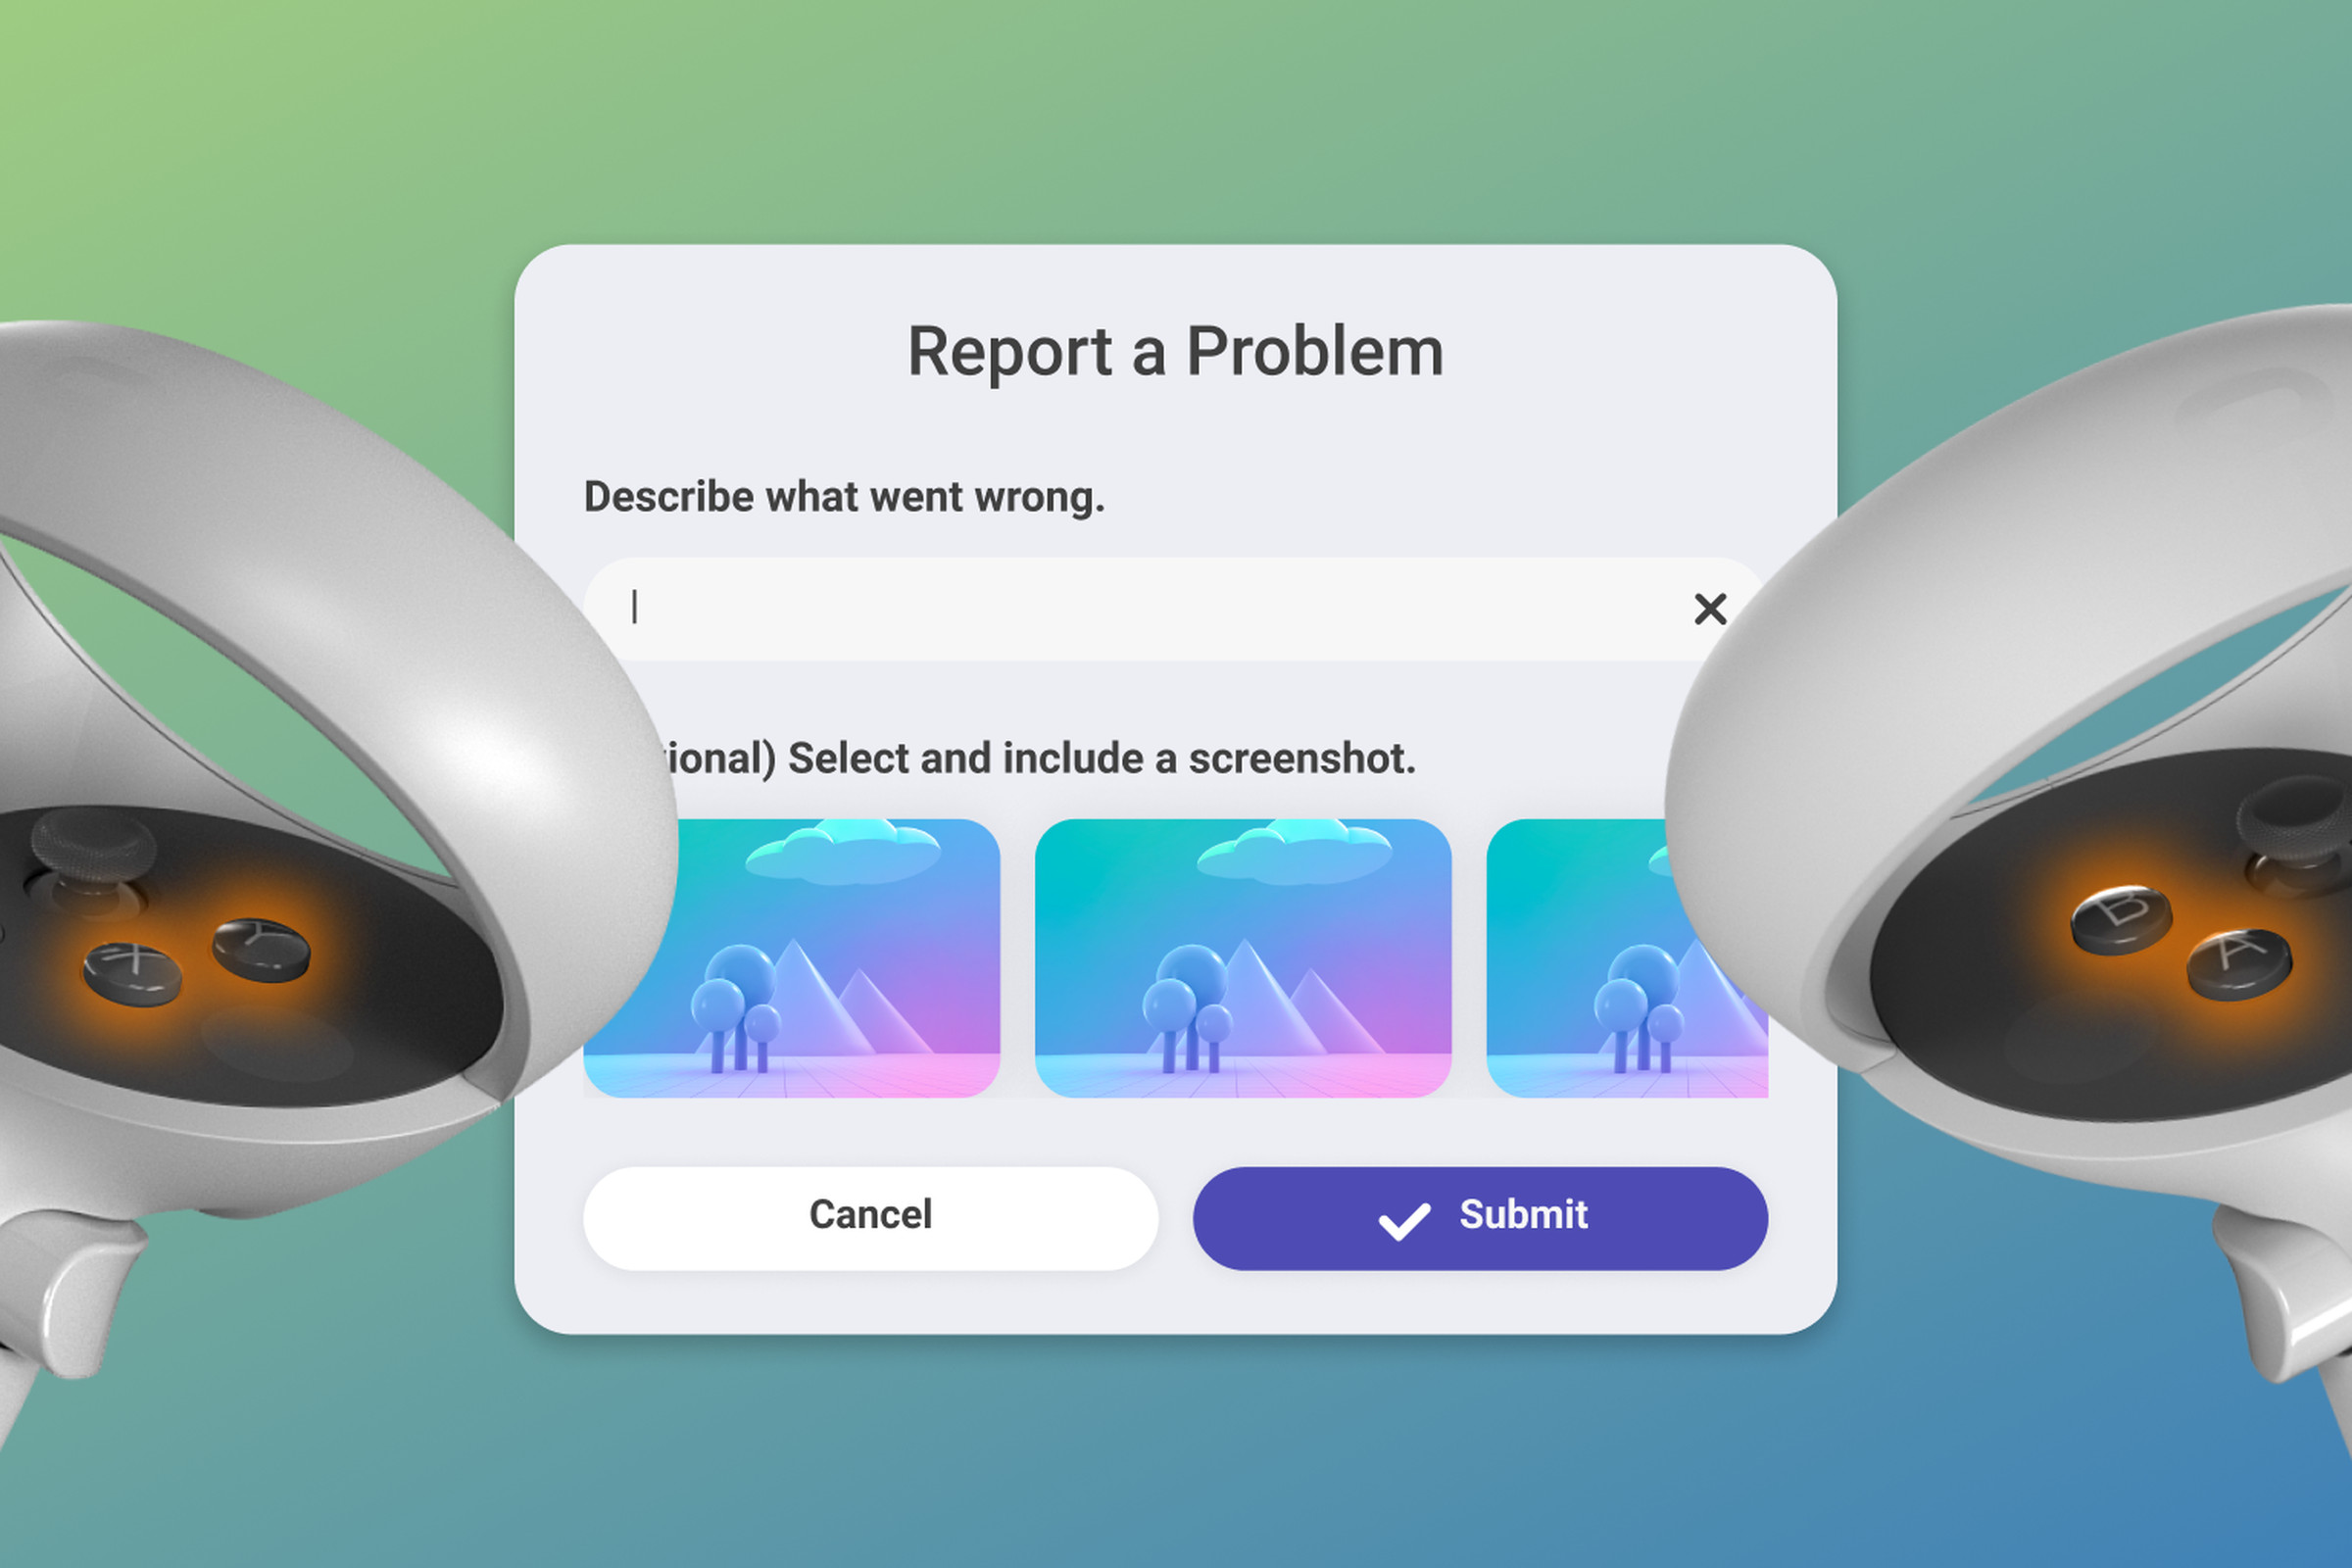 Illustration of two Quest controllers with their X, Y, A, and B buttons being held down, and the “report a problem” screen that asks users to describe what went wrong.